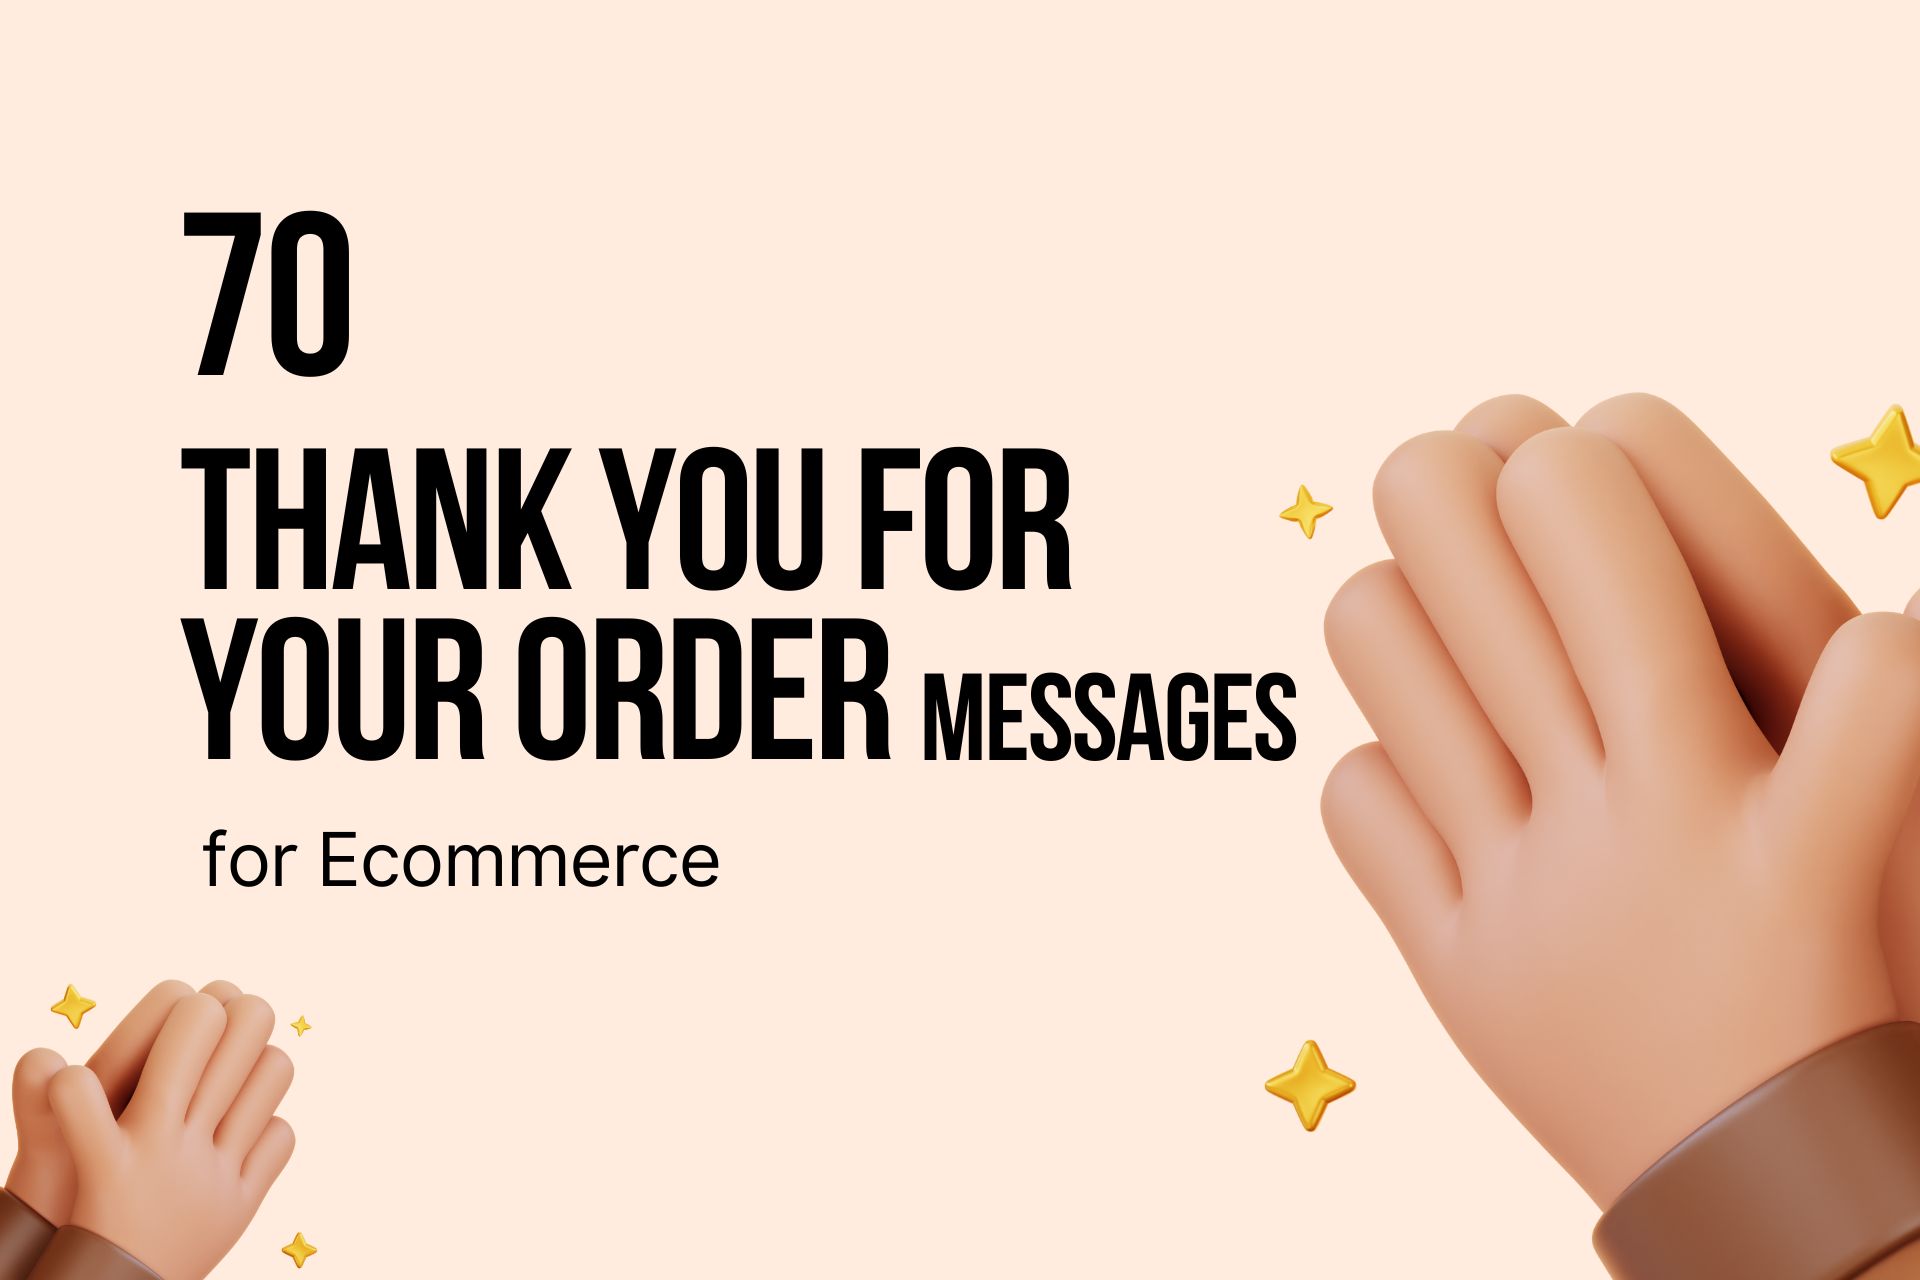 70 “Thank You for Your Order" Messages for Ecommerce